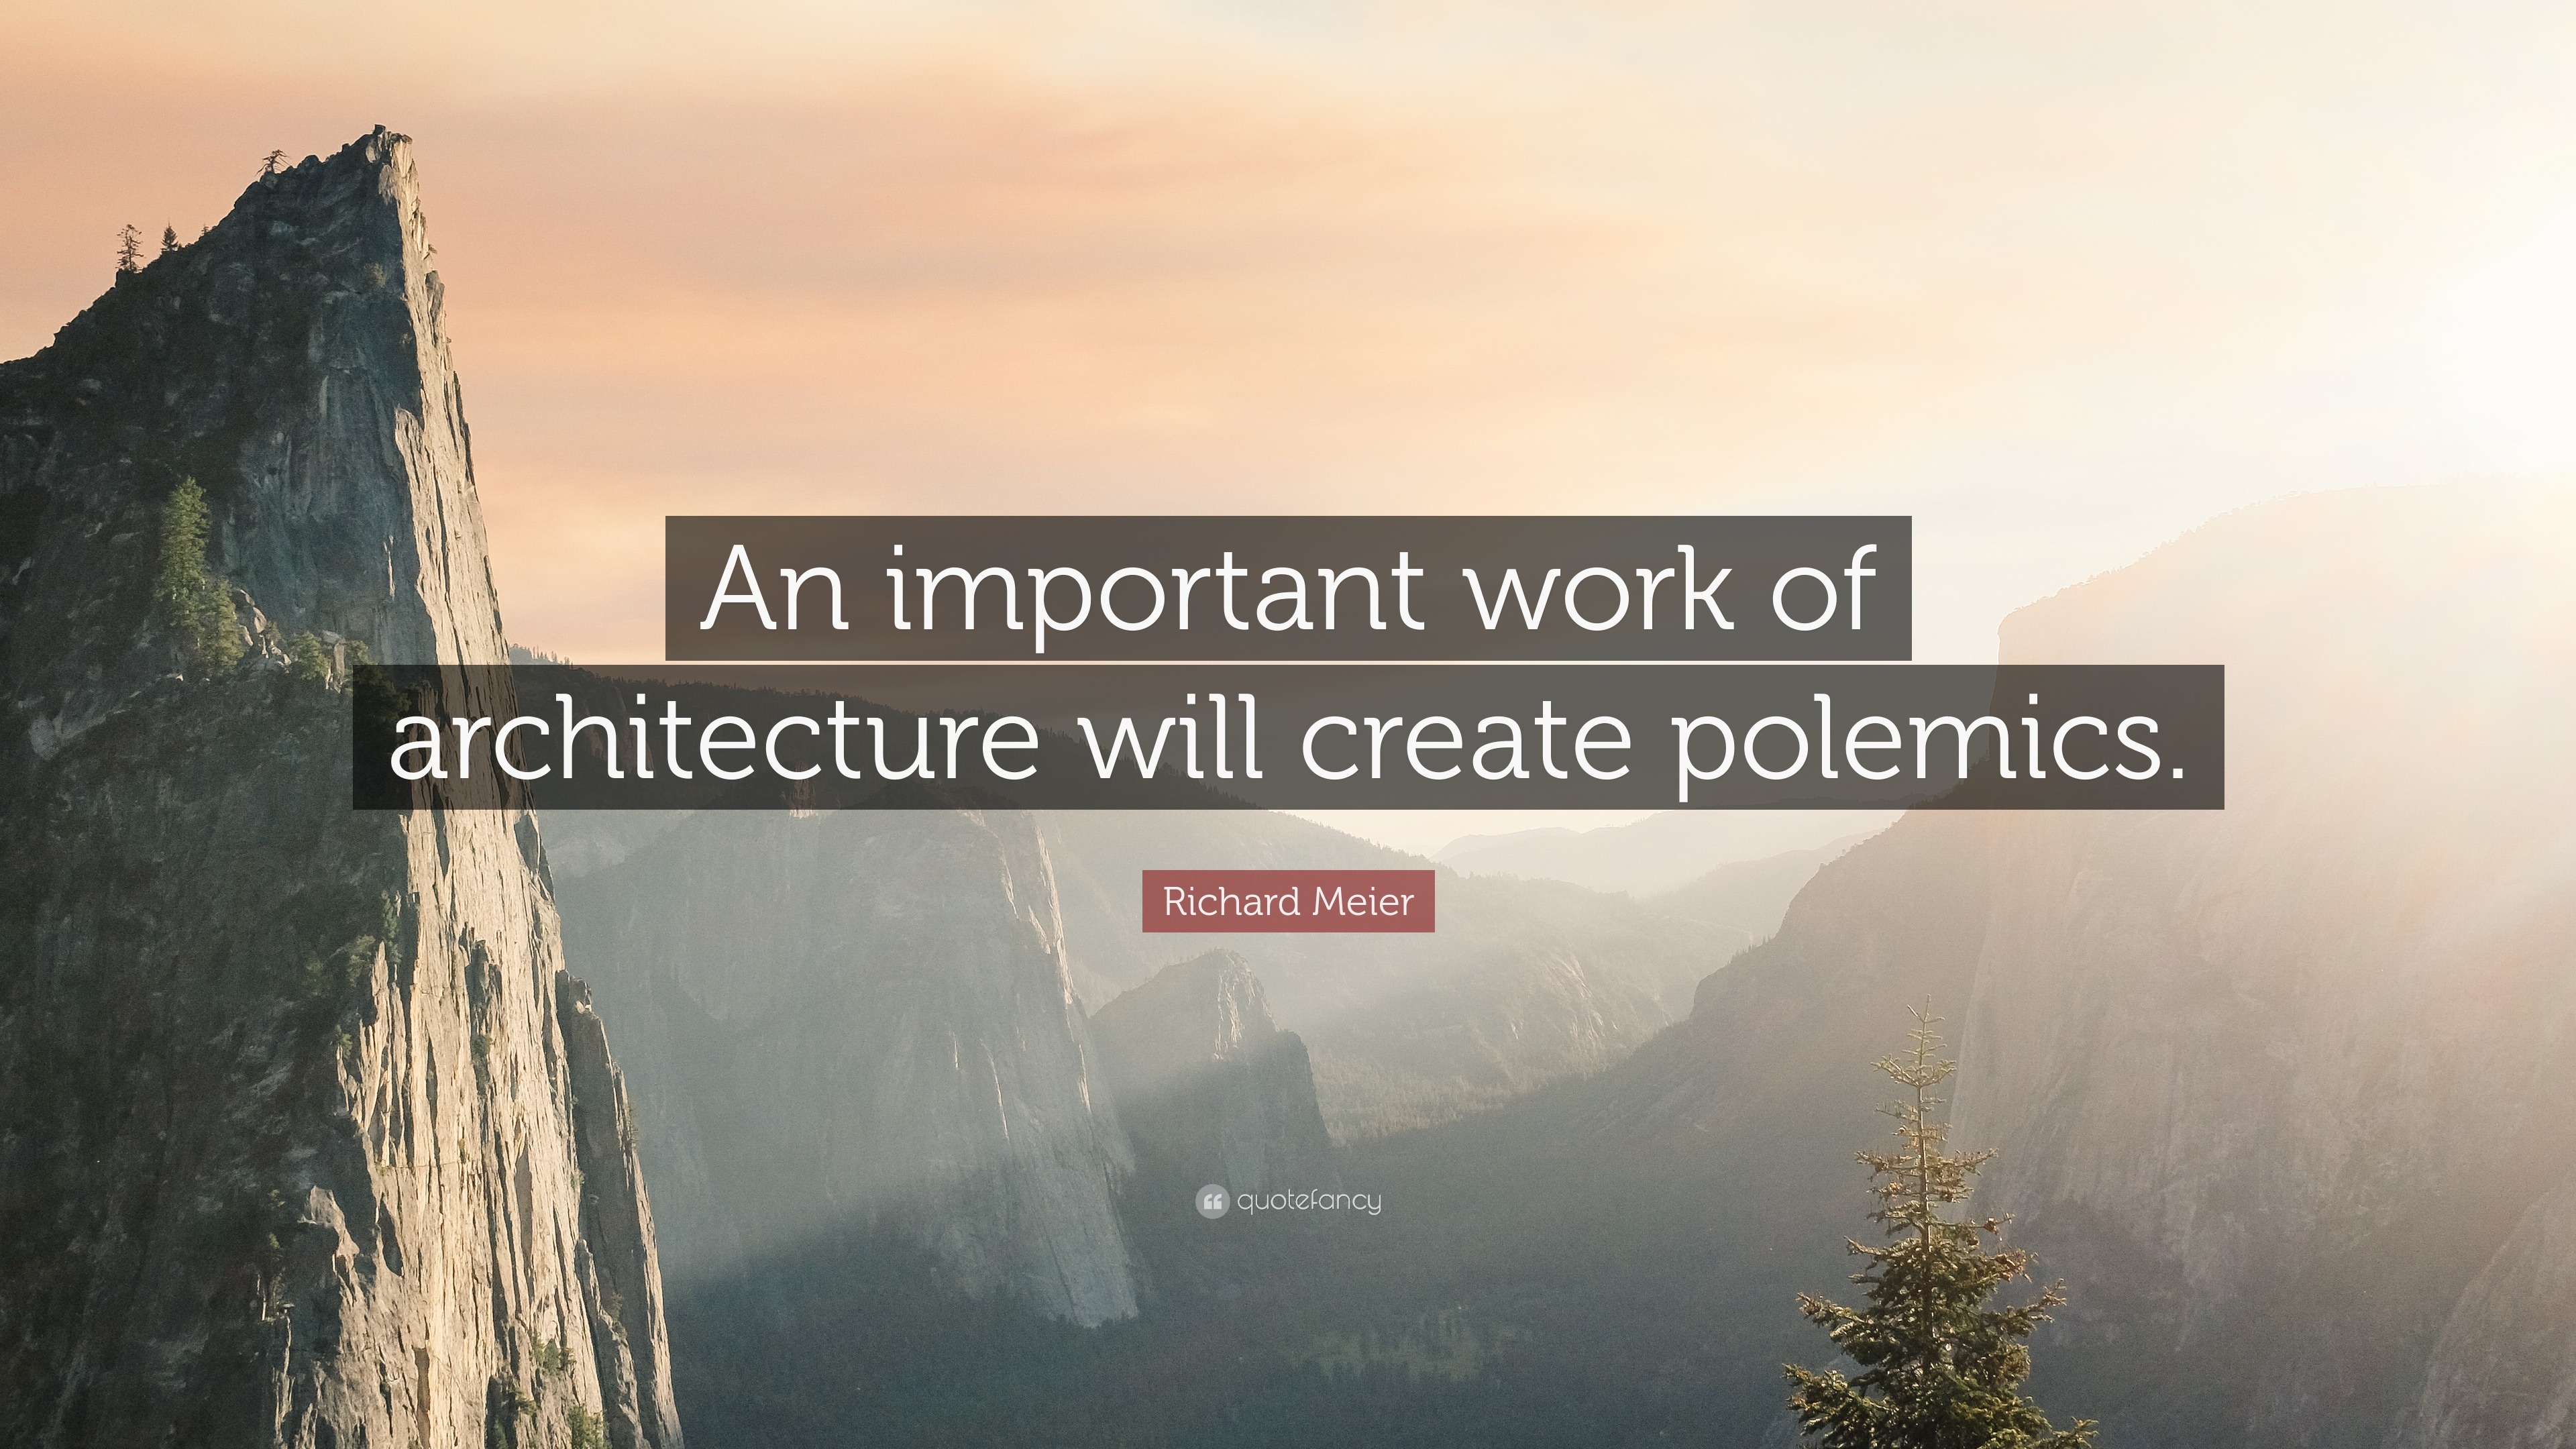 Richard Meier Quote: “An important work of architecture will create ...